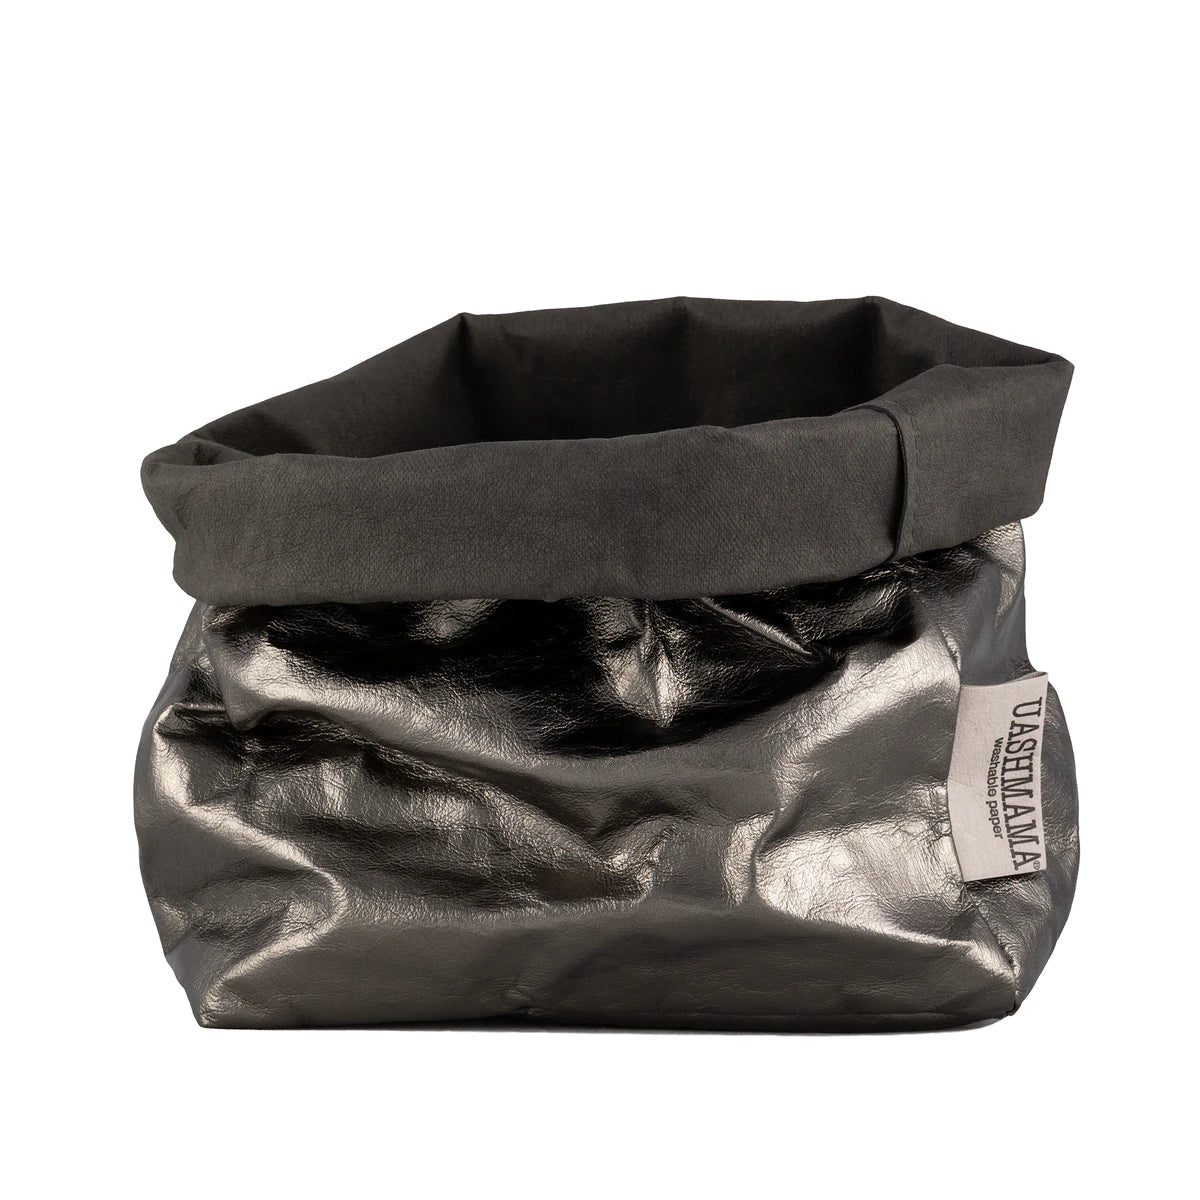 A washable paper bag is shown. The bag is rolled down at the top and features a UASHMAMA logo label on the bottom left corner. The bag pictured is the medium size in metallic dark grey.